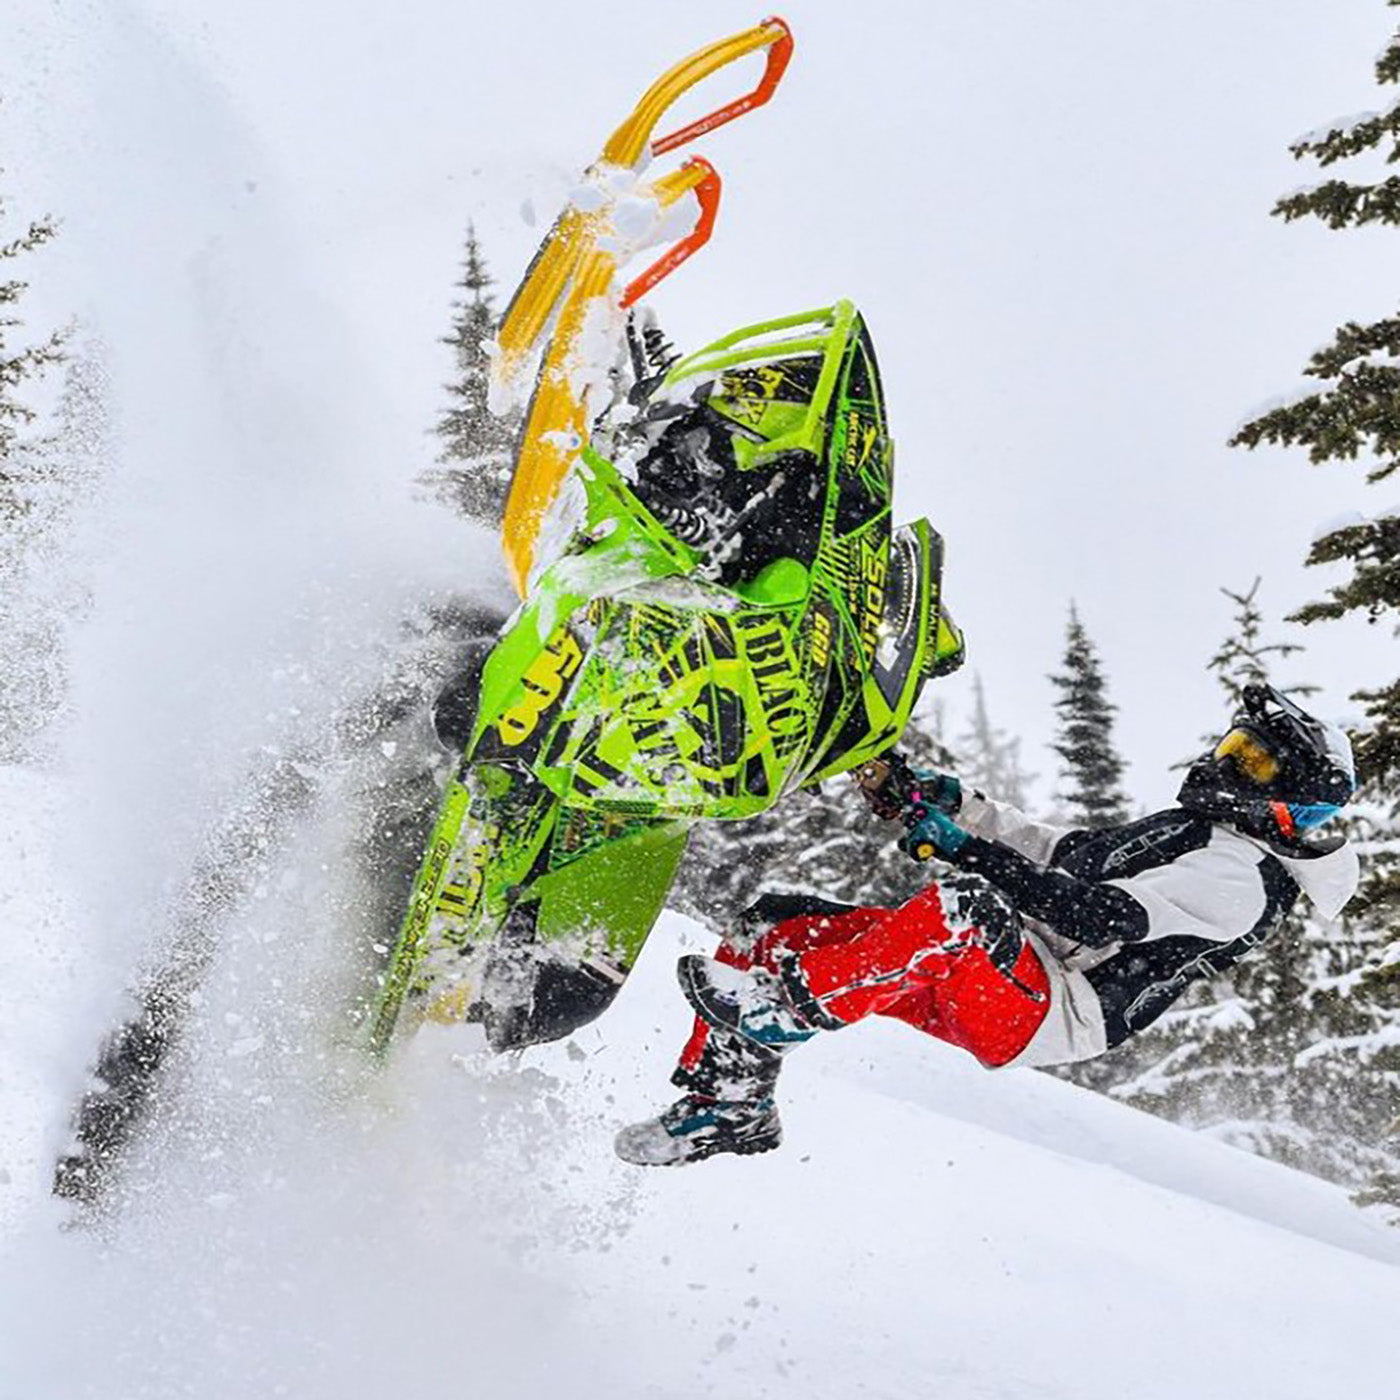 Maverick Walker snowmobiling with yellow C&A Pro skis with orange handles 